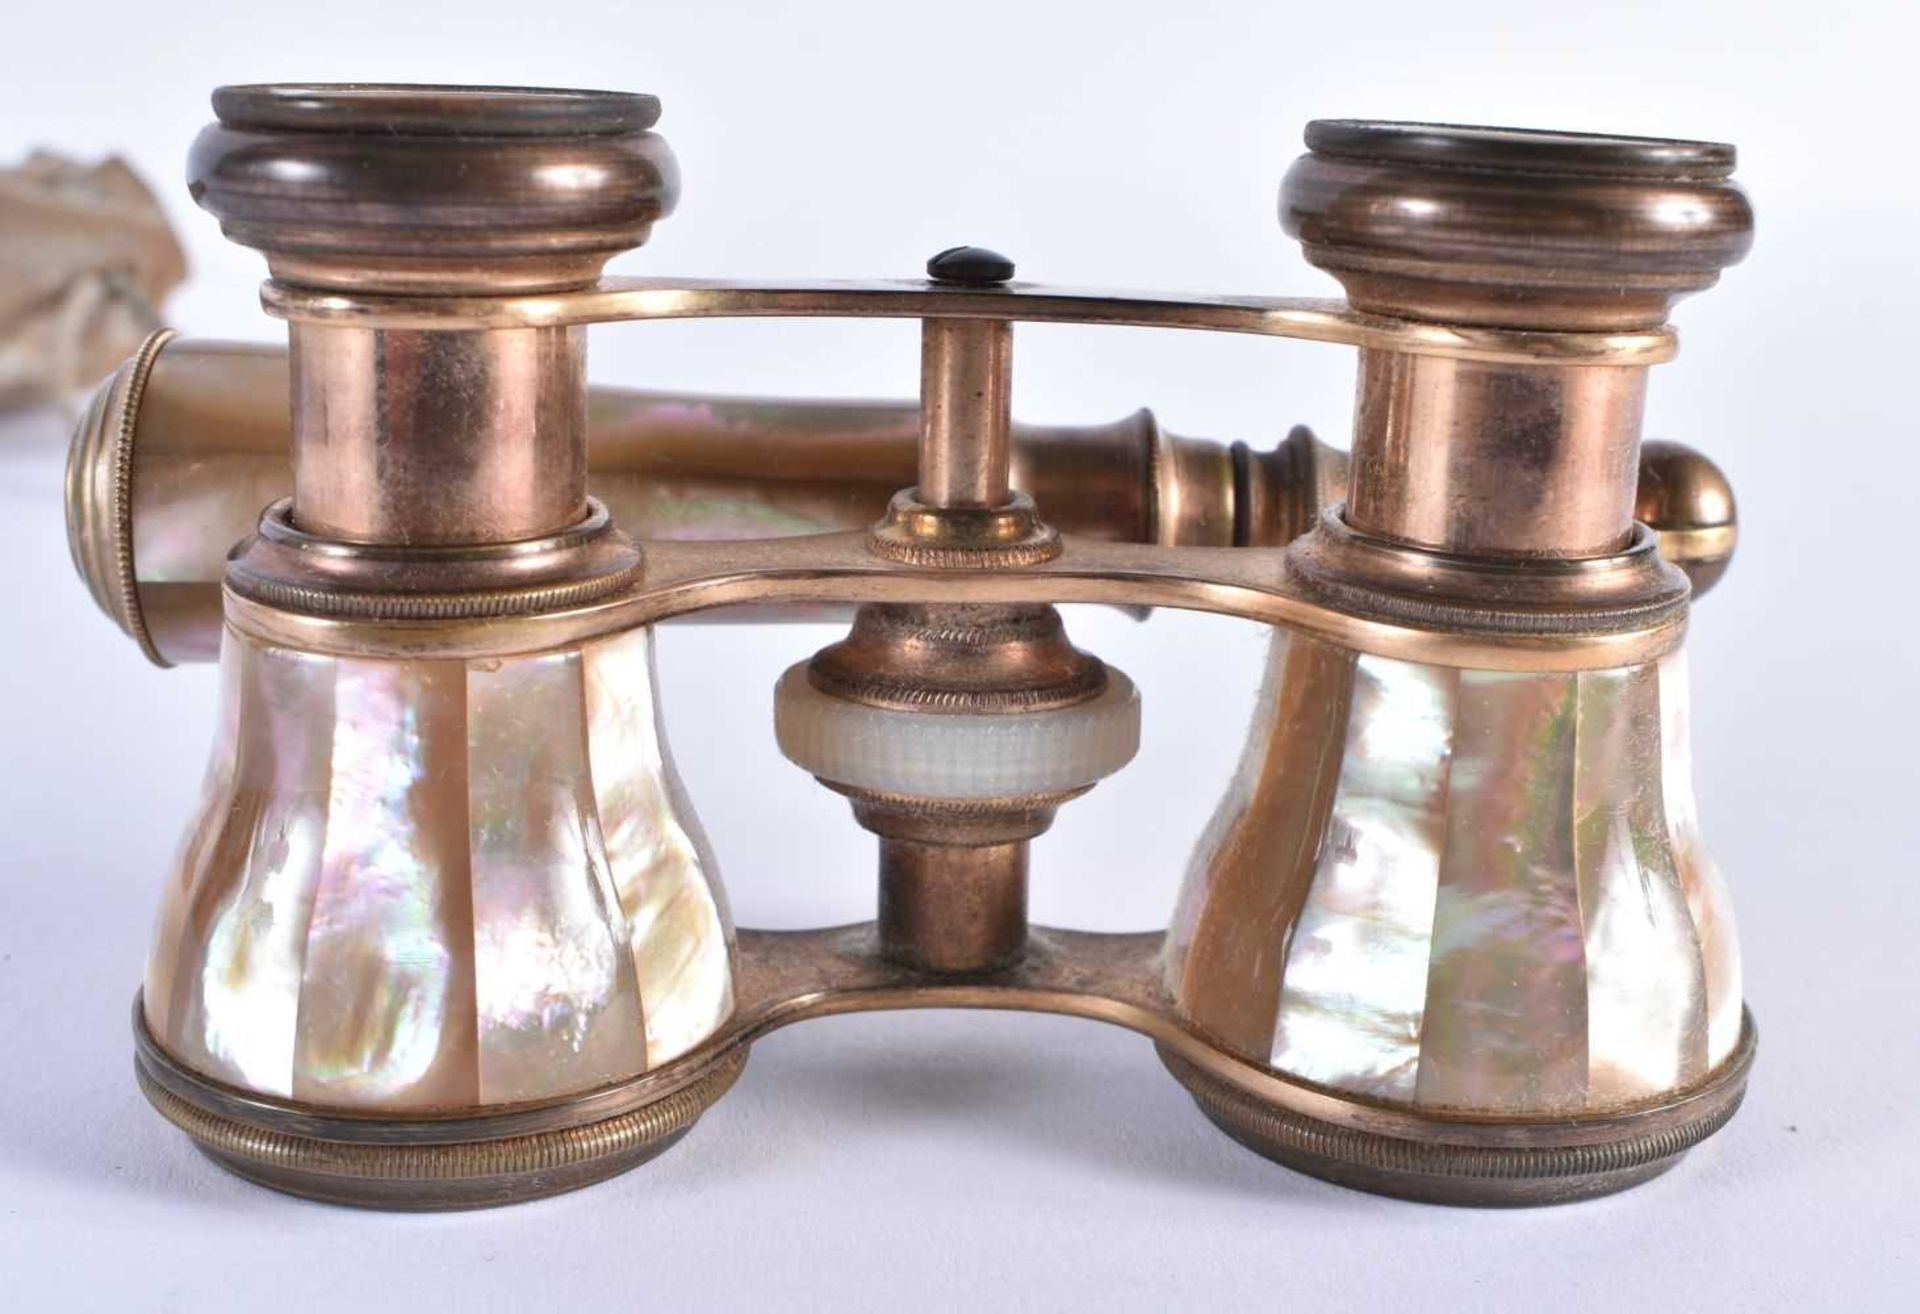 A PAIR OF MOTHER OF PEARL OPERA GLASSES. 18 cm wide extended. - Image 3 of 4